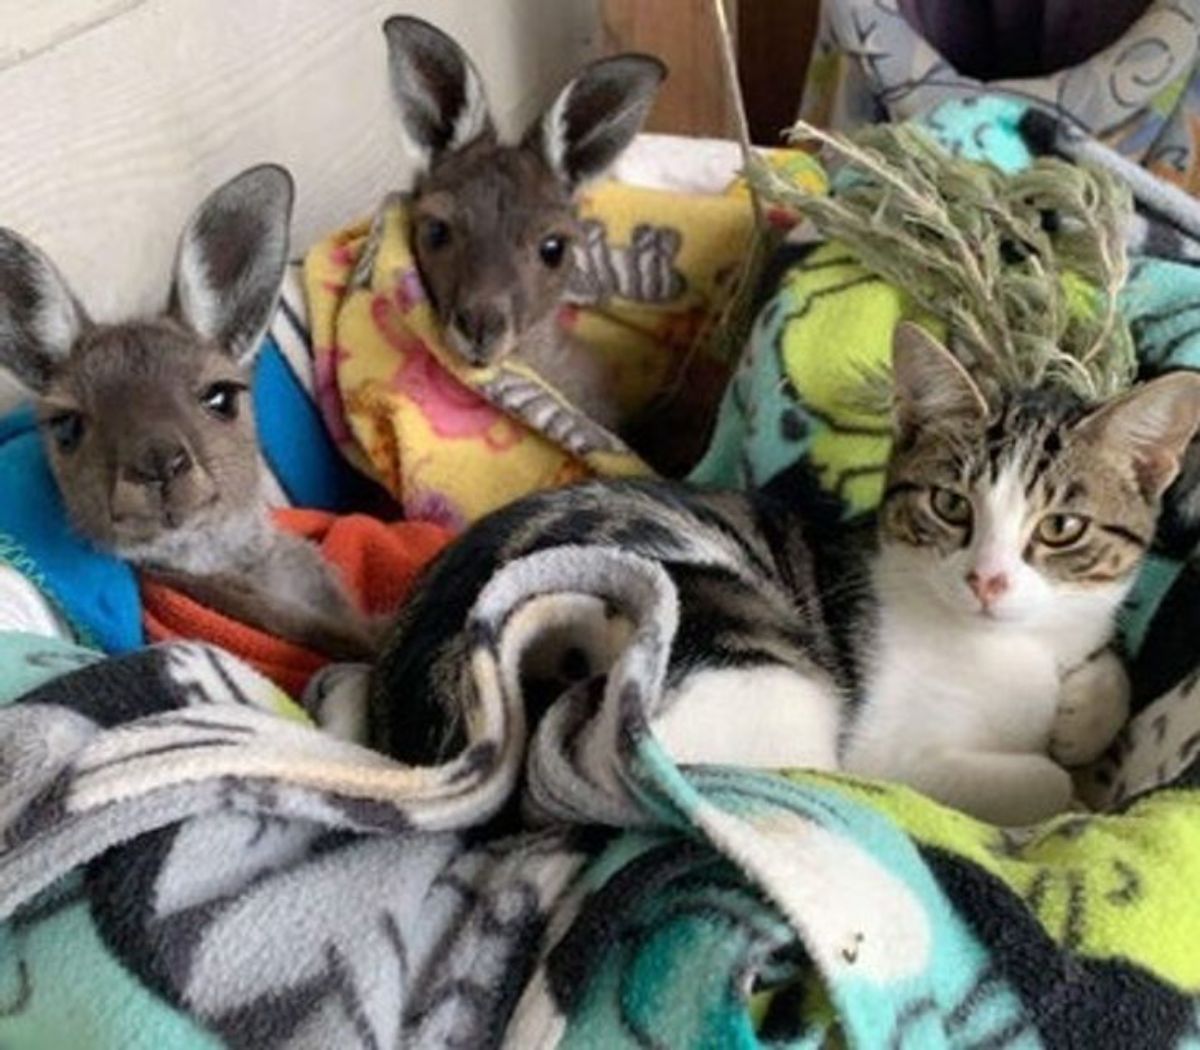 2 joeys cuddled in blankets with a grey and white tabby cat